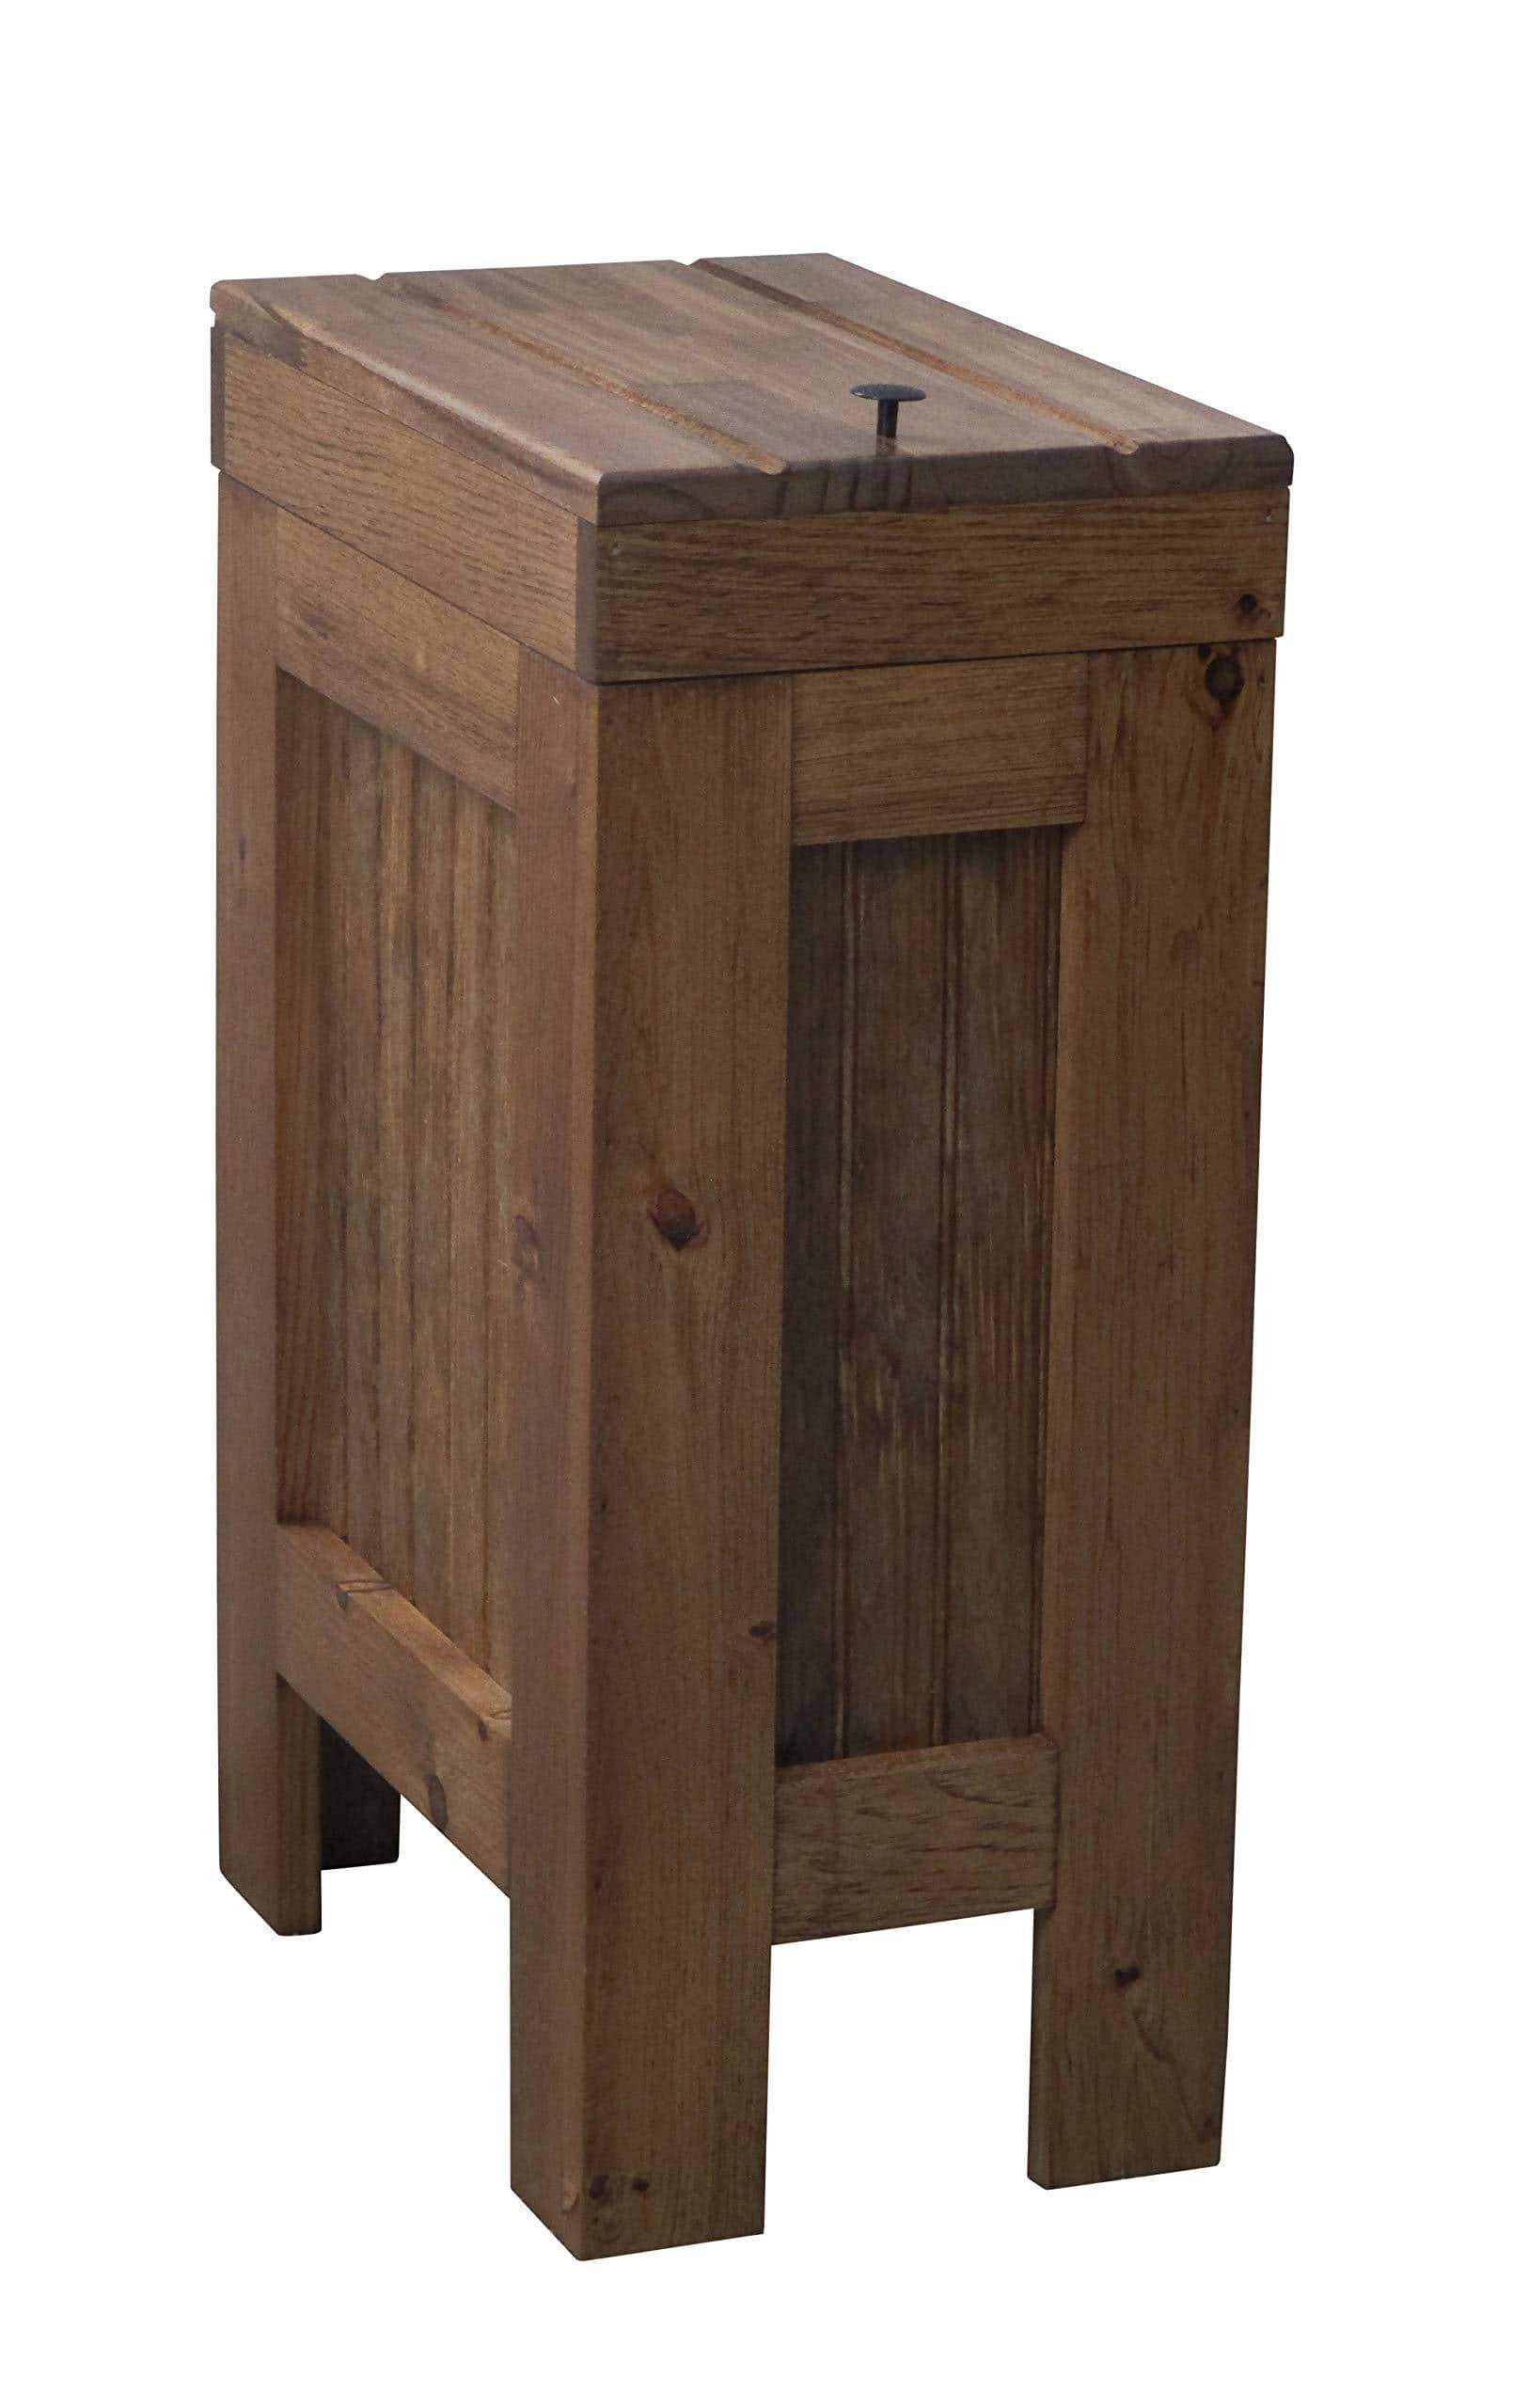 Related buffalowood shop rustic wood trash bin kitchen trash can wood trash can dog food storage container 13 gallon recycle bin early american stain with metal knob